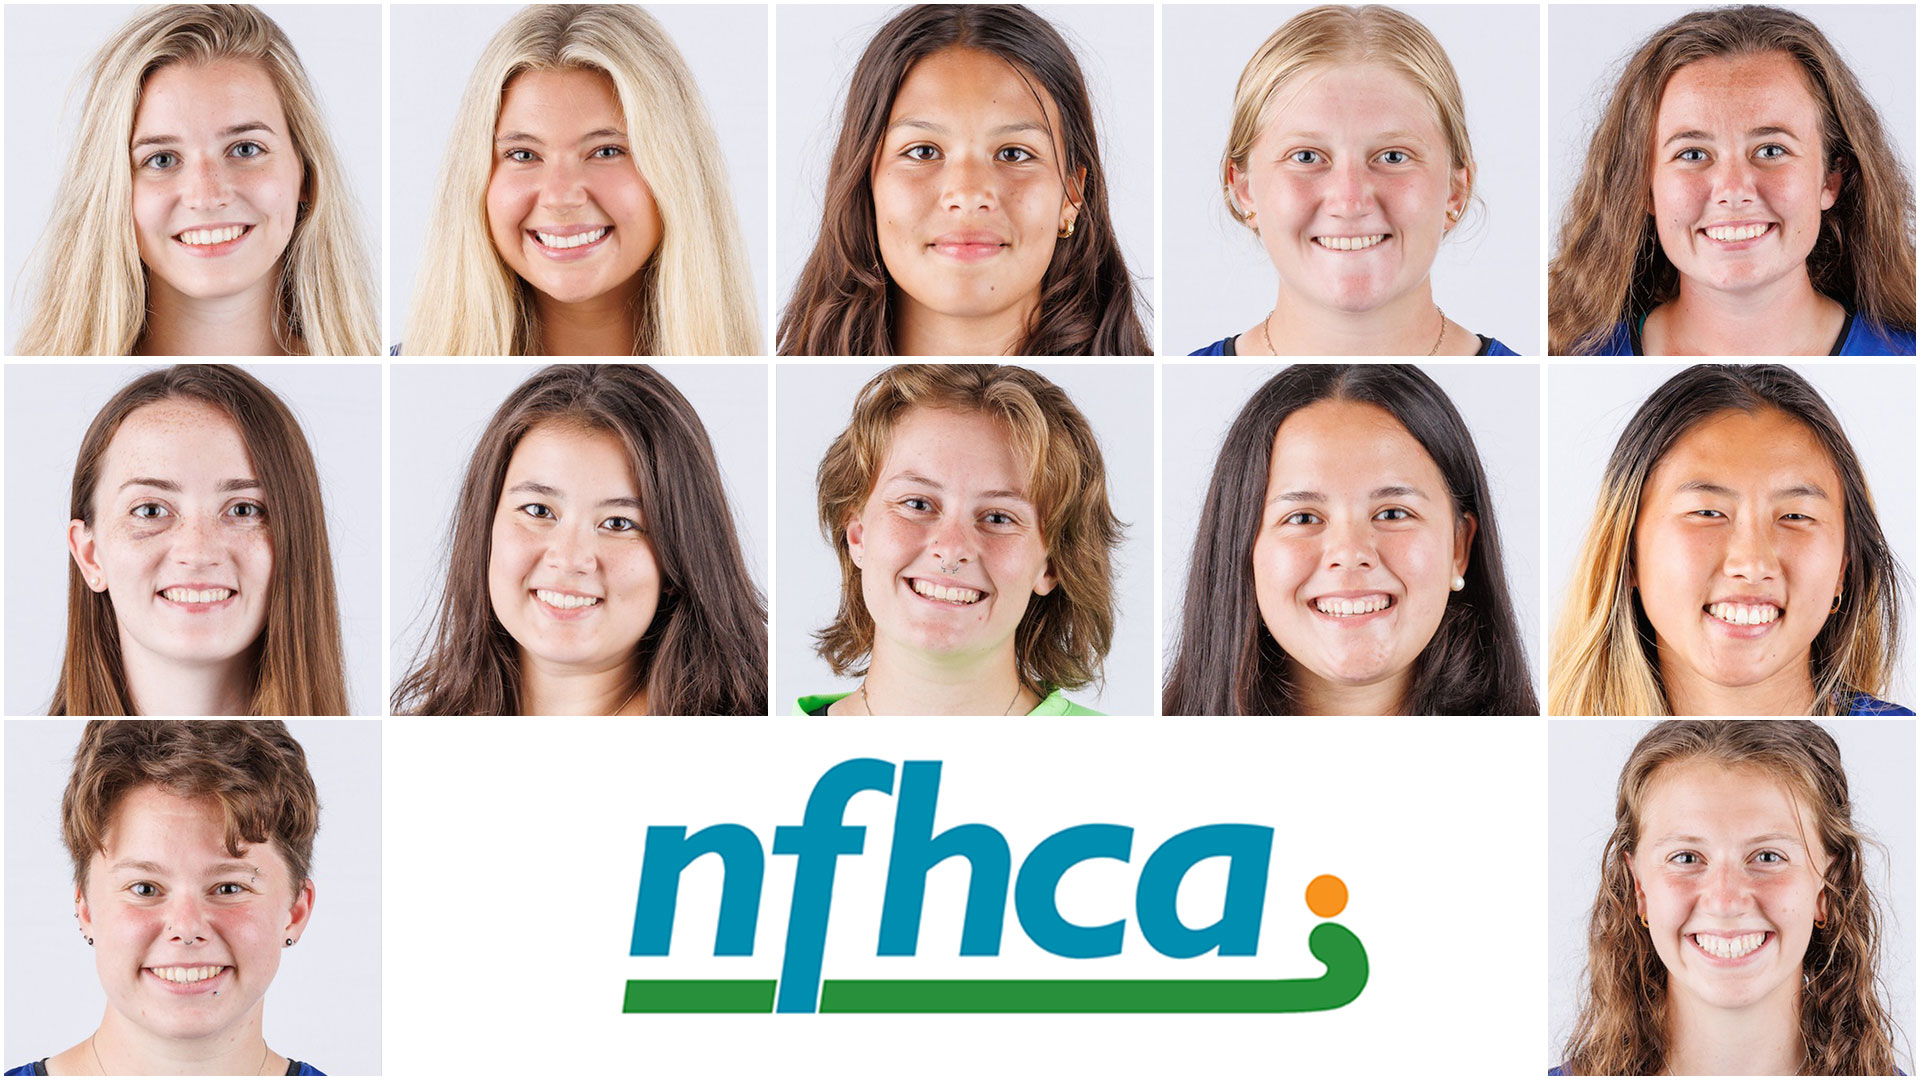 12 members of Wellesley Field Hockey were named to the NFHCA National Academic Squad